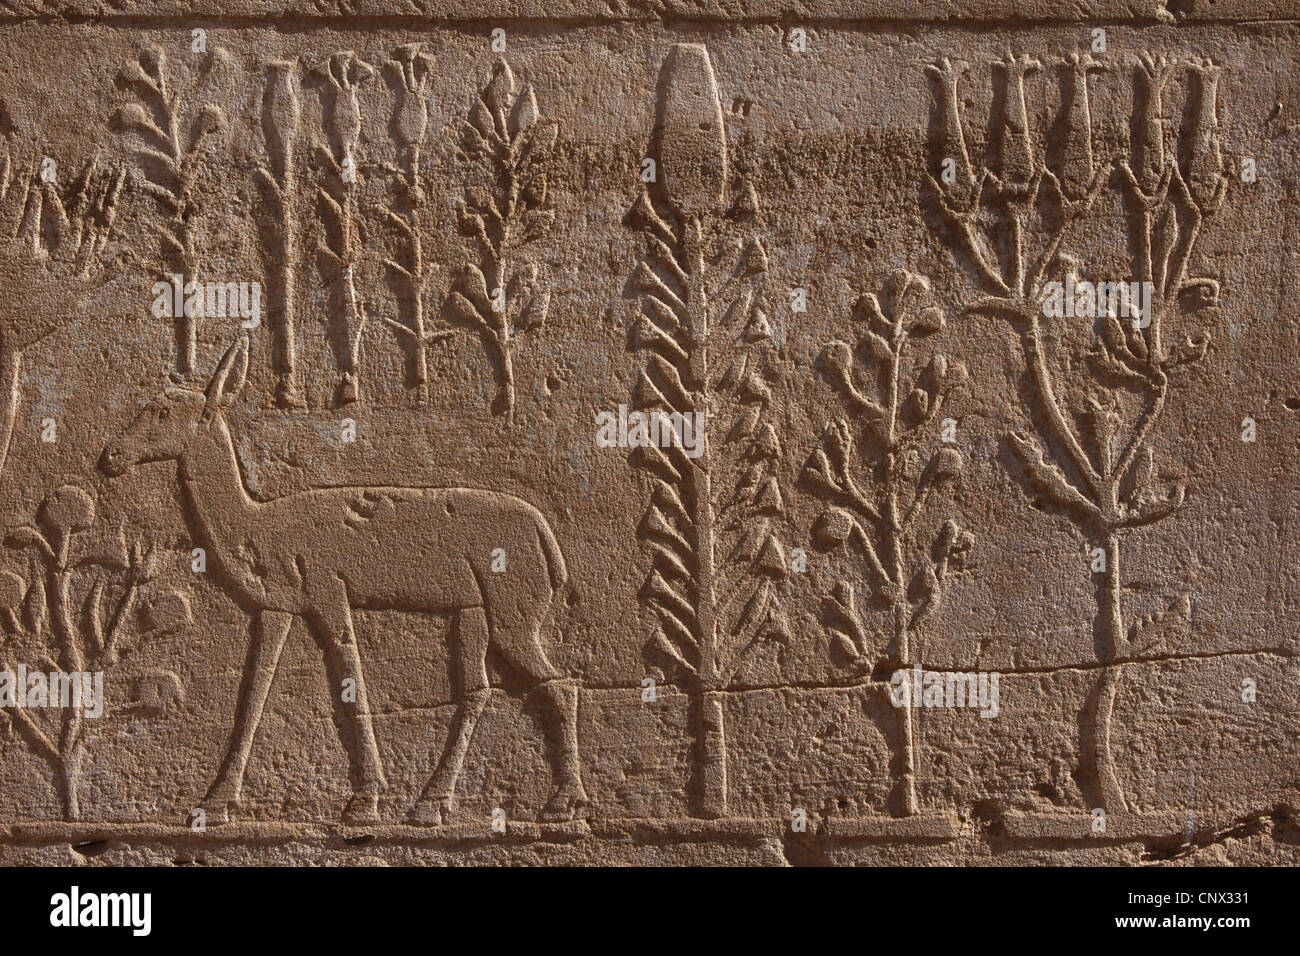 Ancient Egyptian Botanical Garden. Relief in the Karnak Temple Complex in Luxor, Egypt. Stock Photo